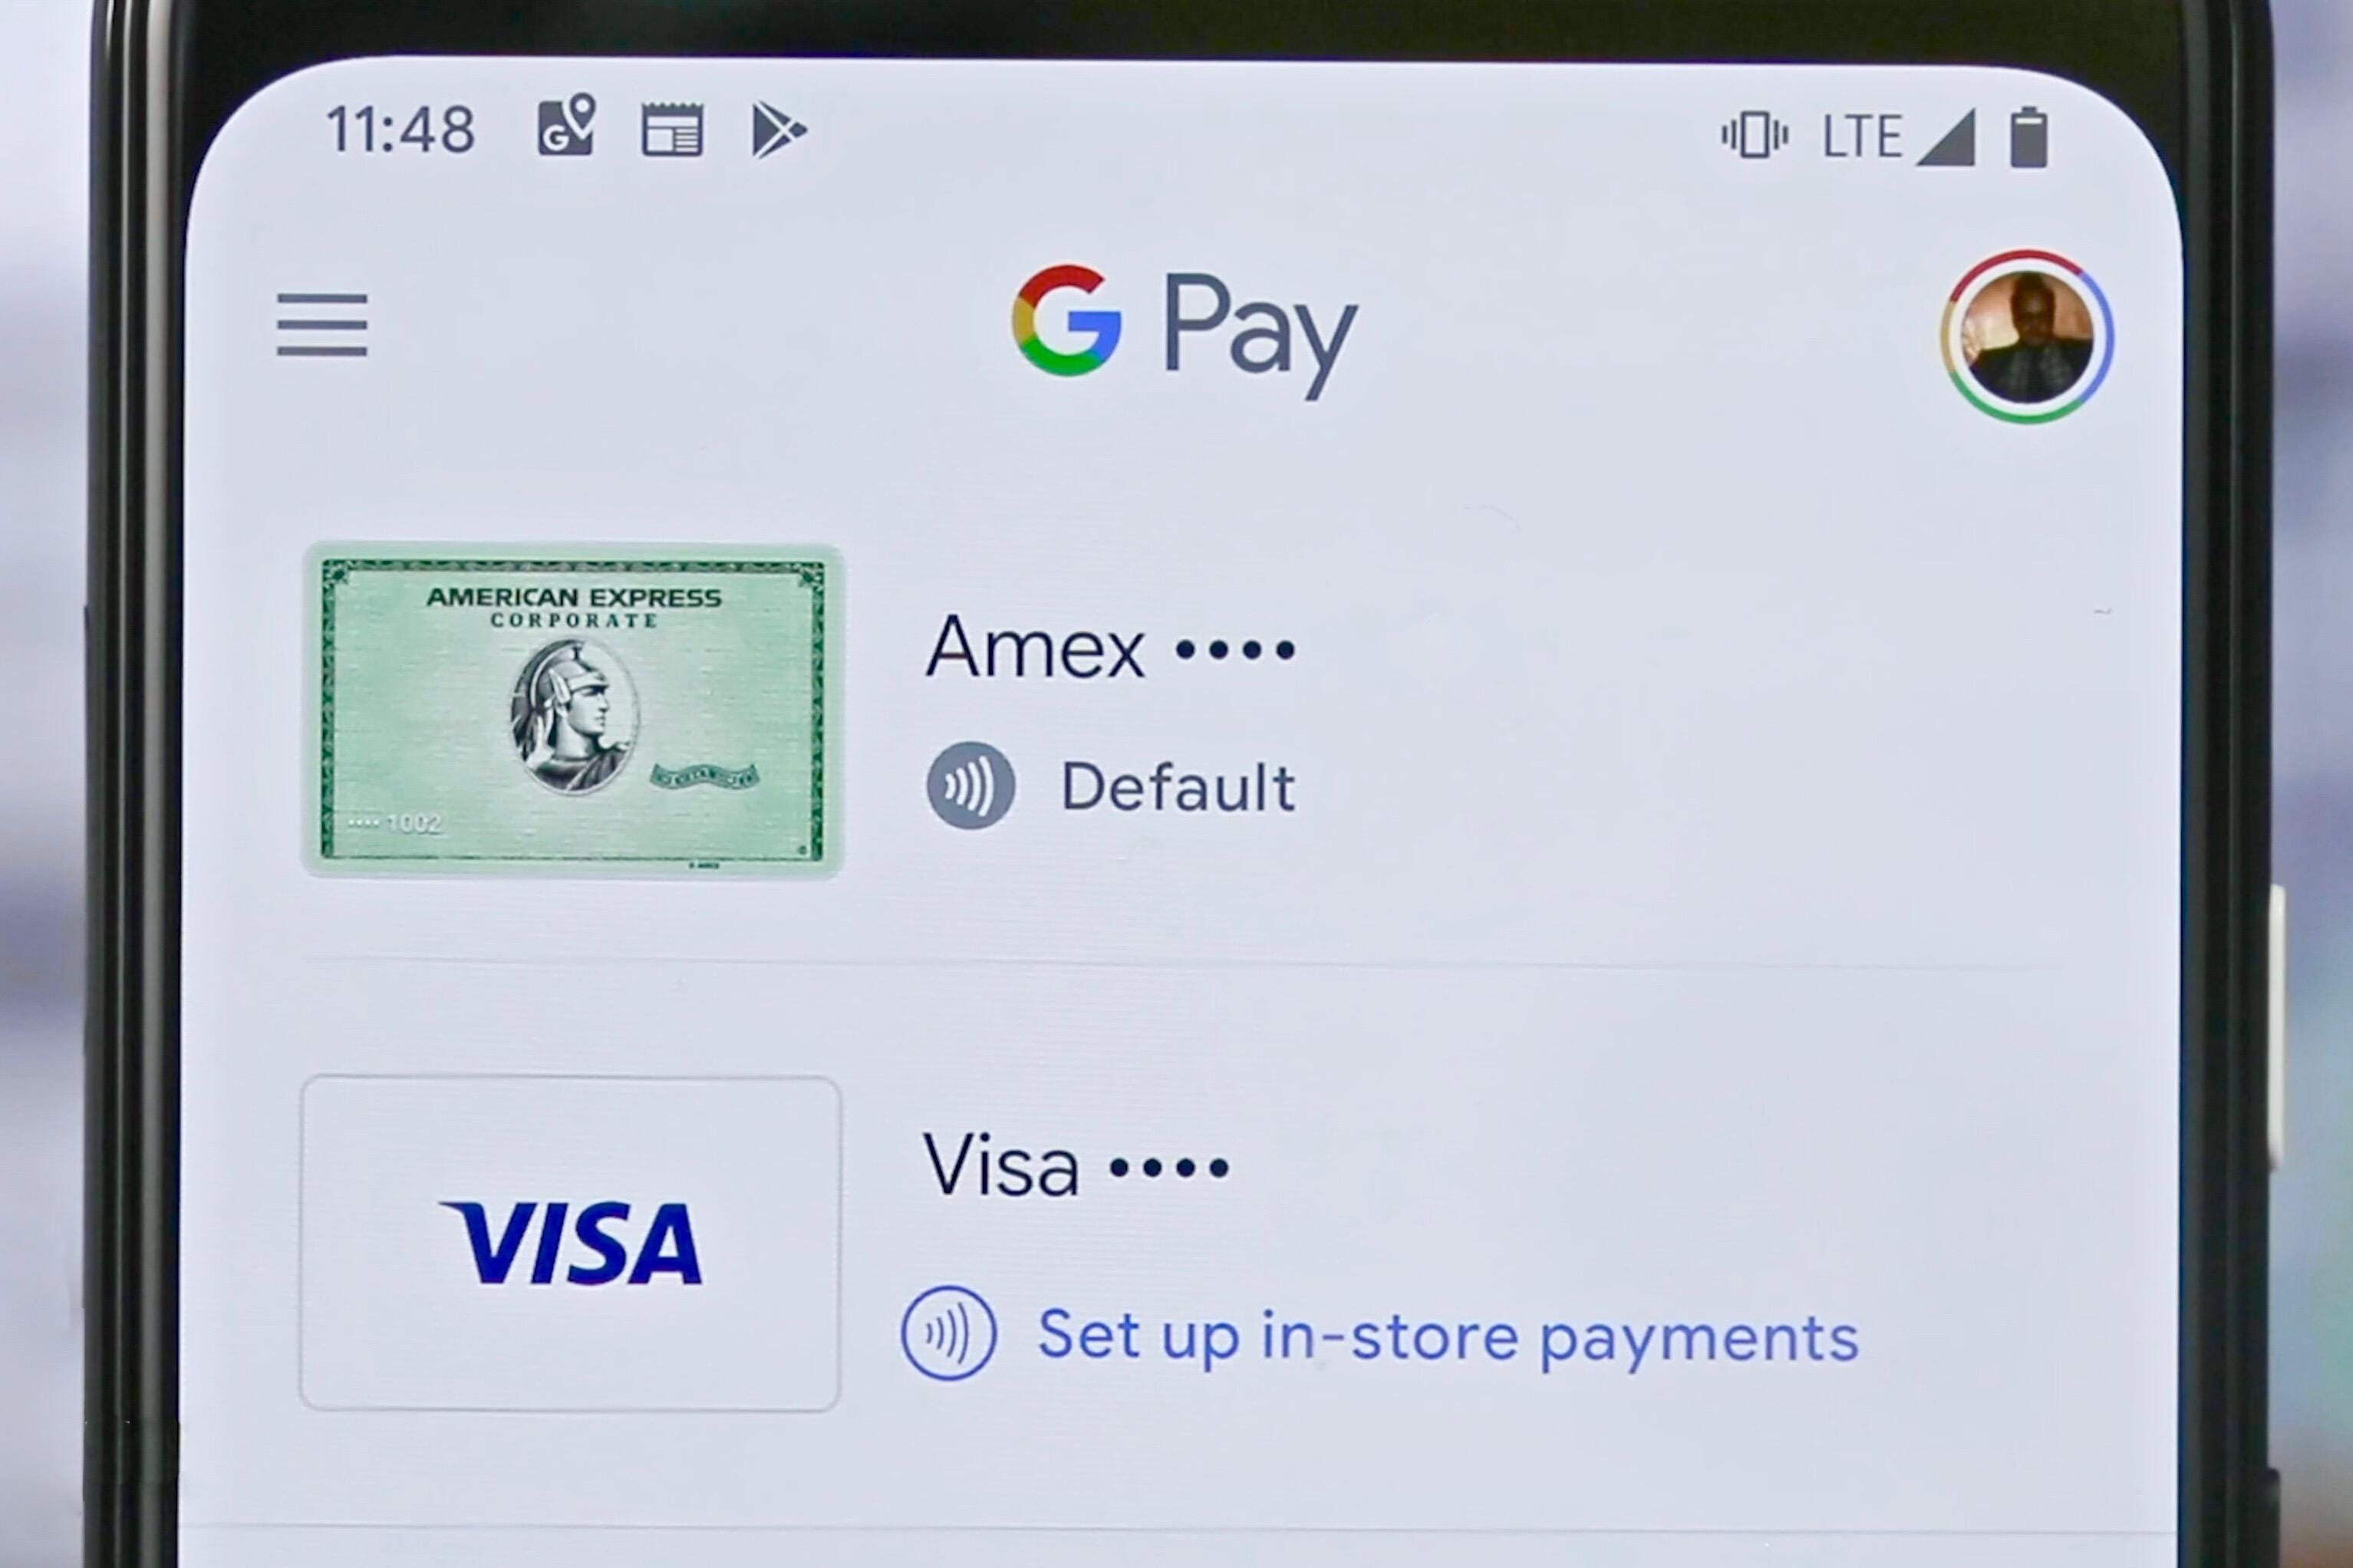 The Google Pay card screen showing different card options for payments